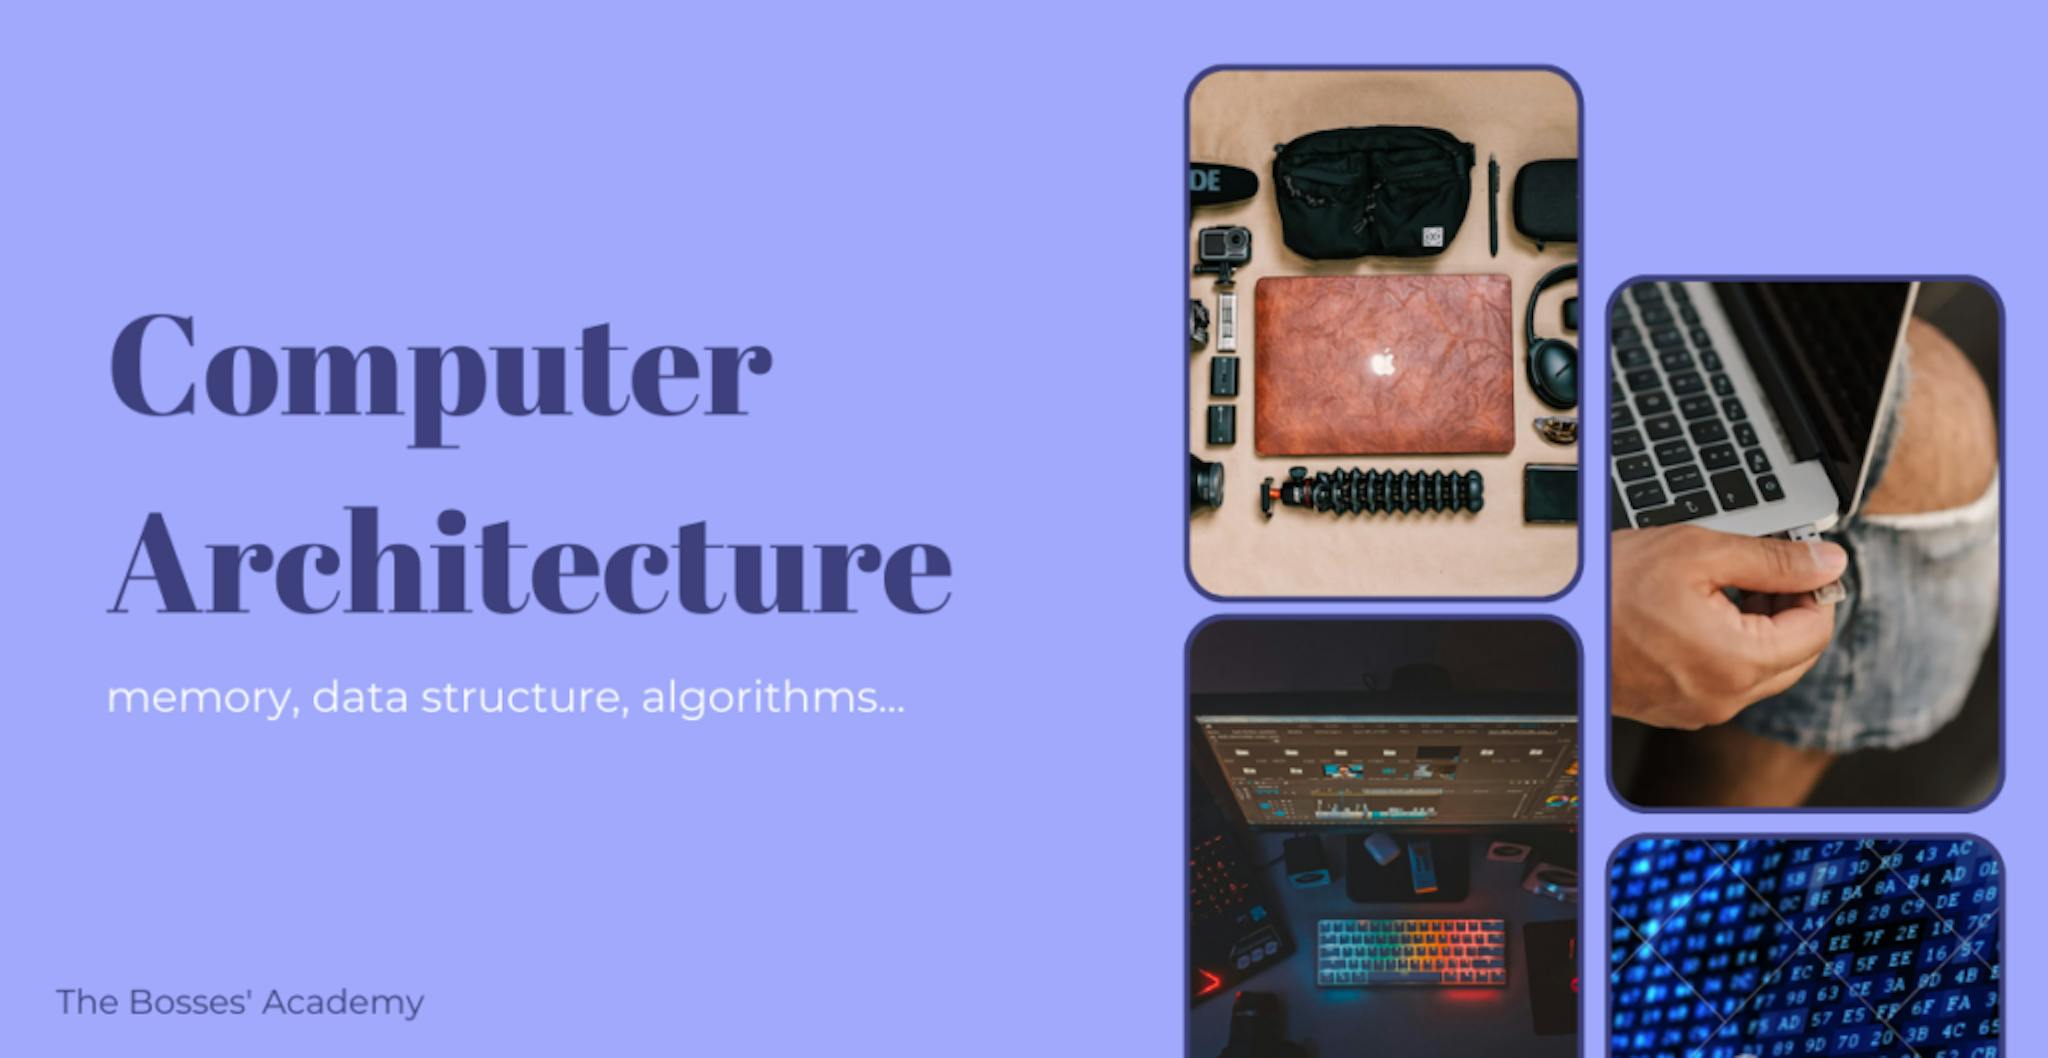 Learn computer architecture to become a web3 developer